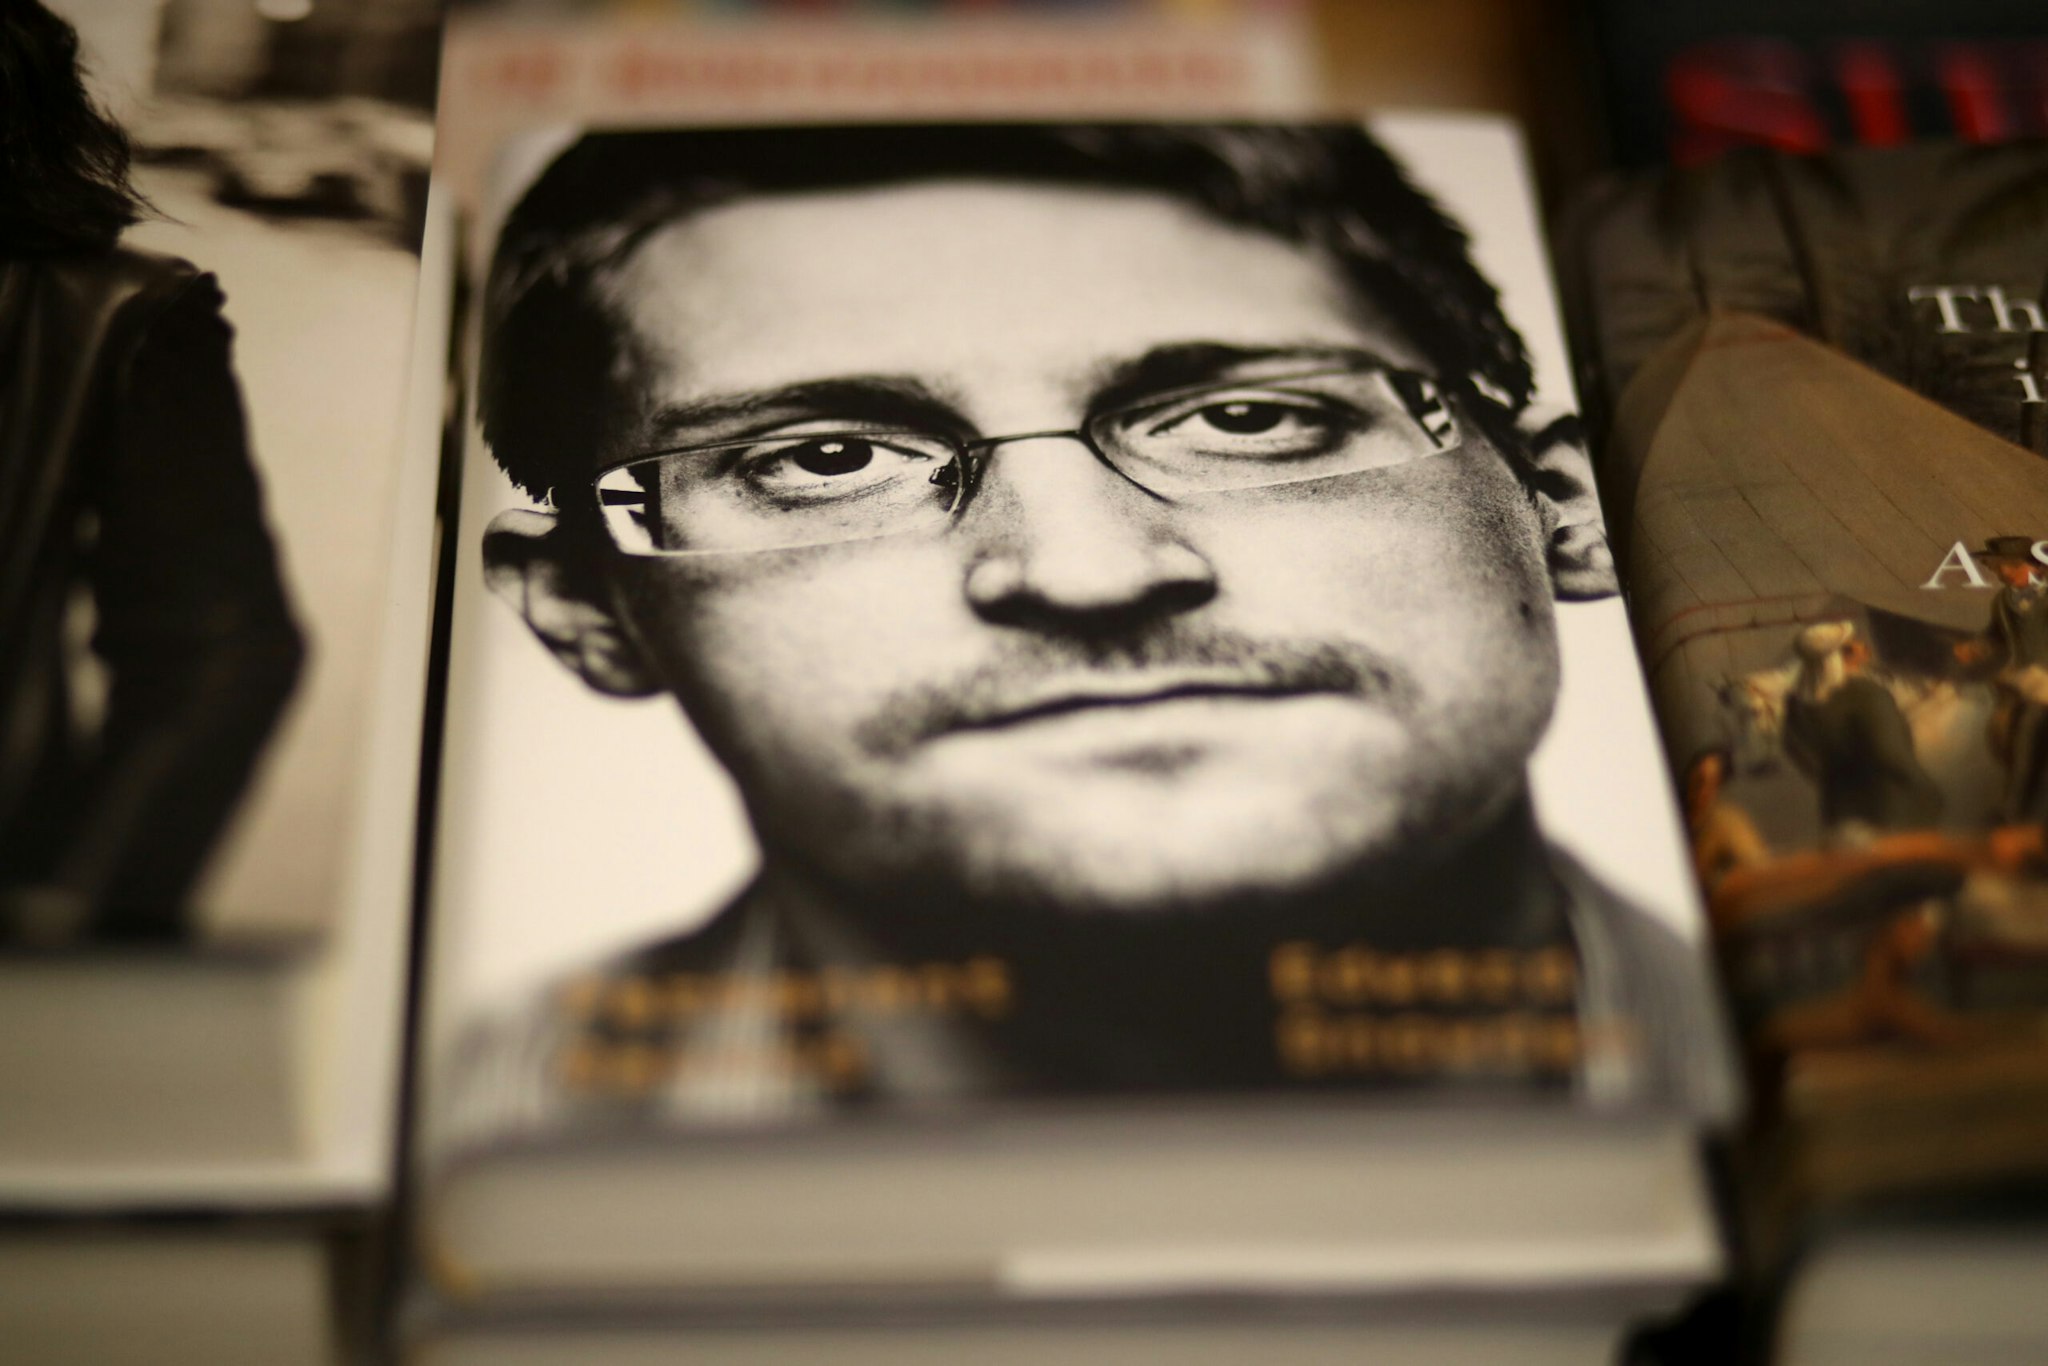 SAN FRANCISCO, CALIFORNIA - SEPTEMBER 17: Newly released "Permanent Record" by Edward Snowden is displayed on a shelf at Books Inc. on September 17, 2019 in San Francisco, California. The U.S. Justice Department has filed suit against Snowden, a former Central Intelligence Agency employee and contractor for the National Security Agency, alleging the book violates non-disclosure agreements. (Photo by Justin Sullivan/Getty Images